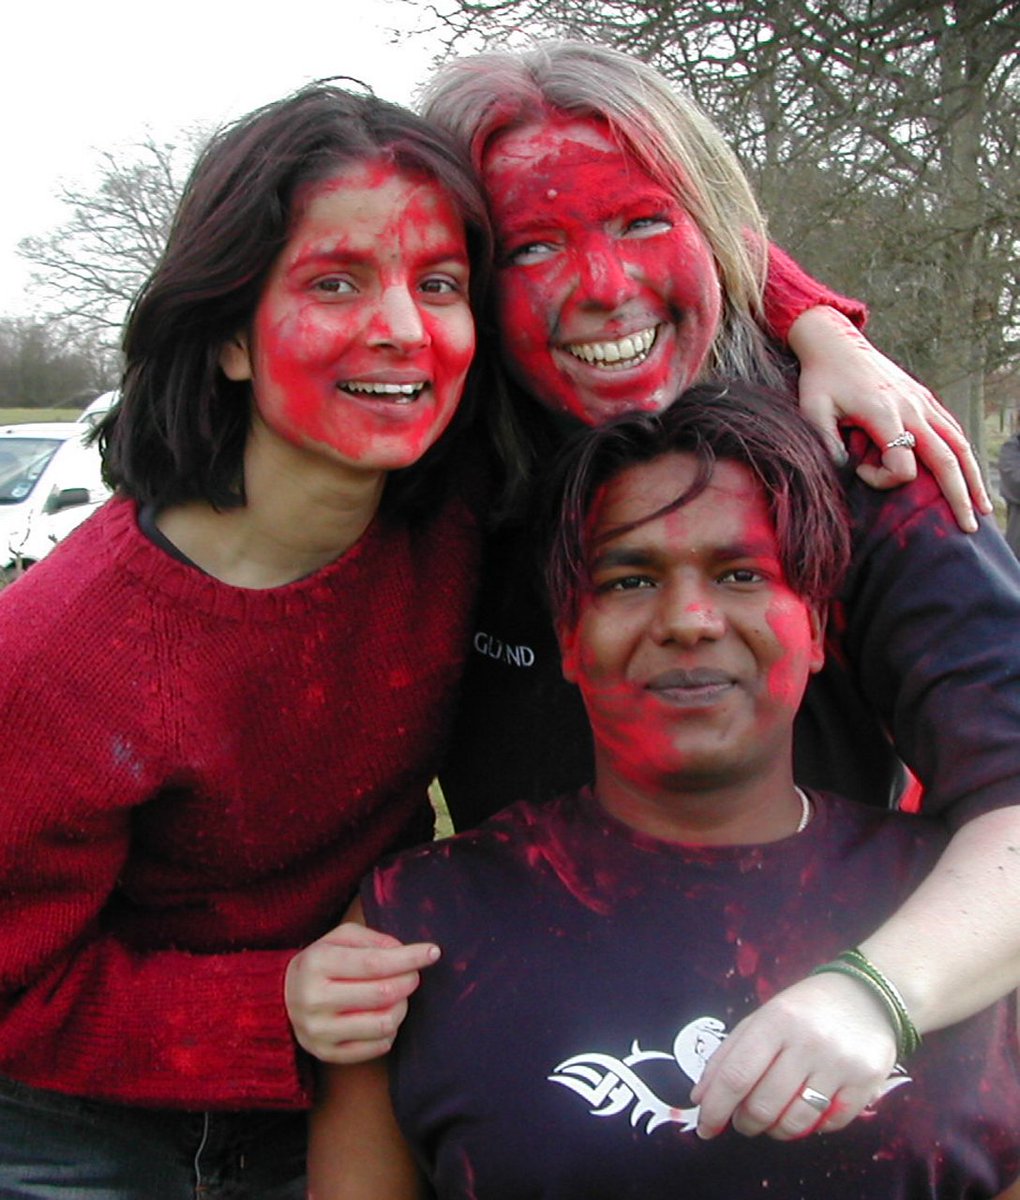 🎨 Happy Holi! May the colours of Holi bring joy, friendship and happiness to you all. 😊 We’ve so many happy memories of celebrating the festival of colours @PestalozziUK. #Holi #Pestalozzimemories #friendship